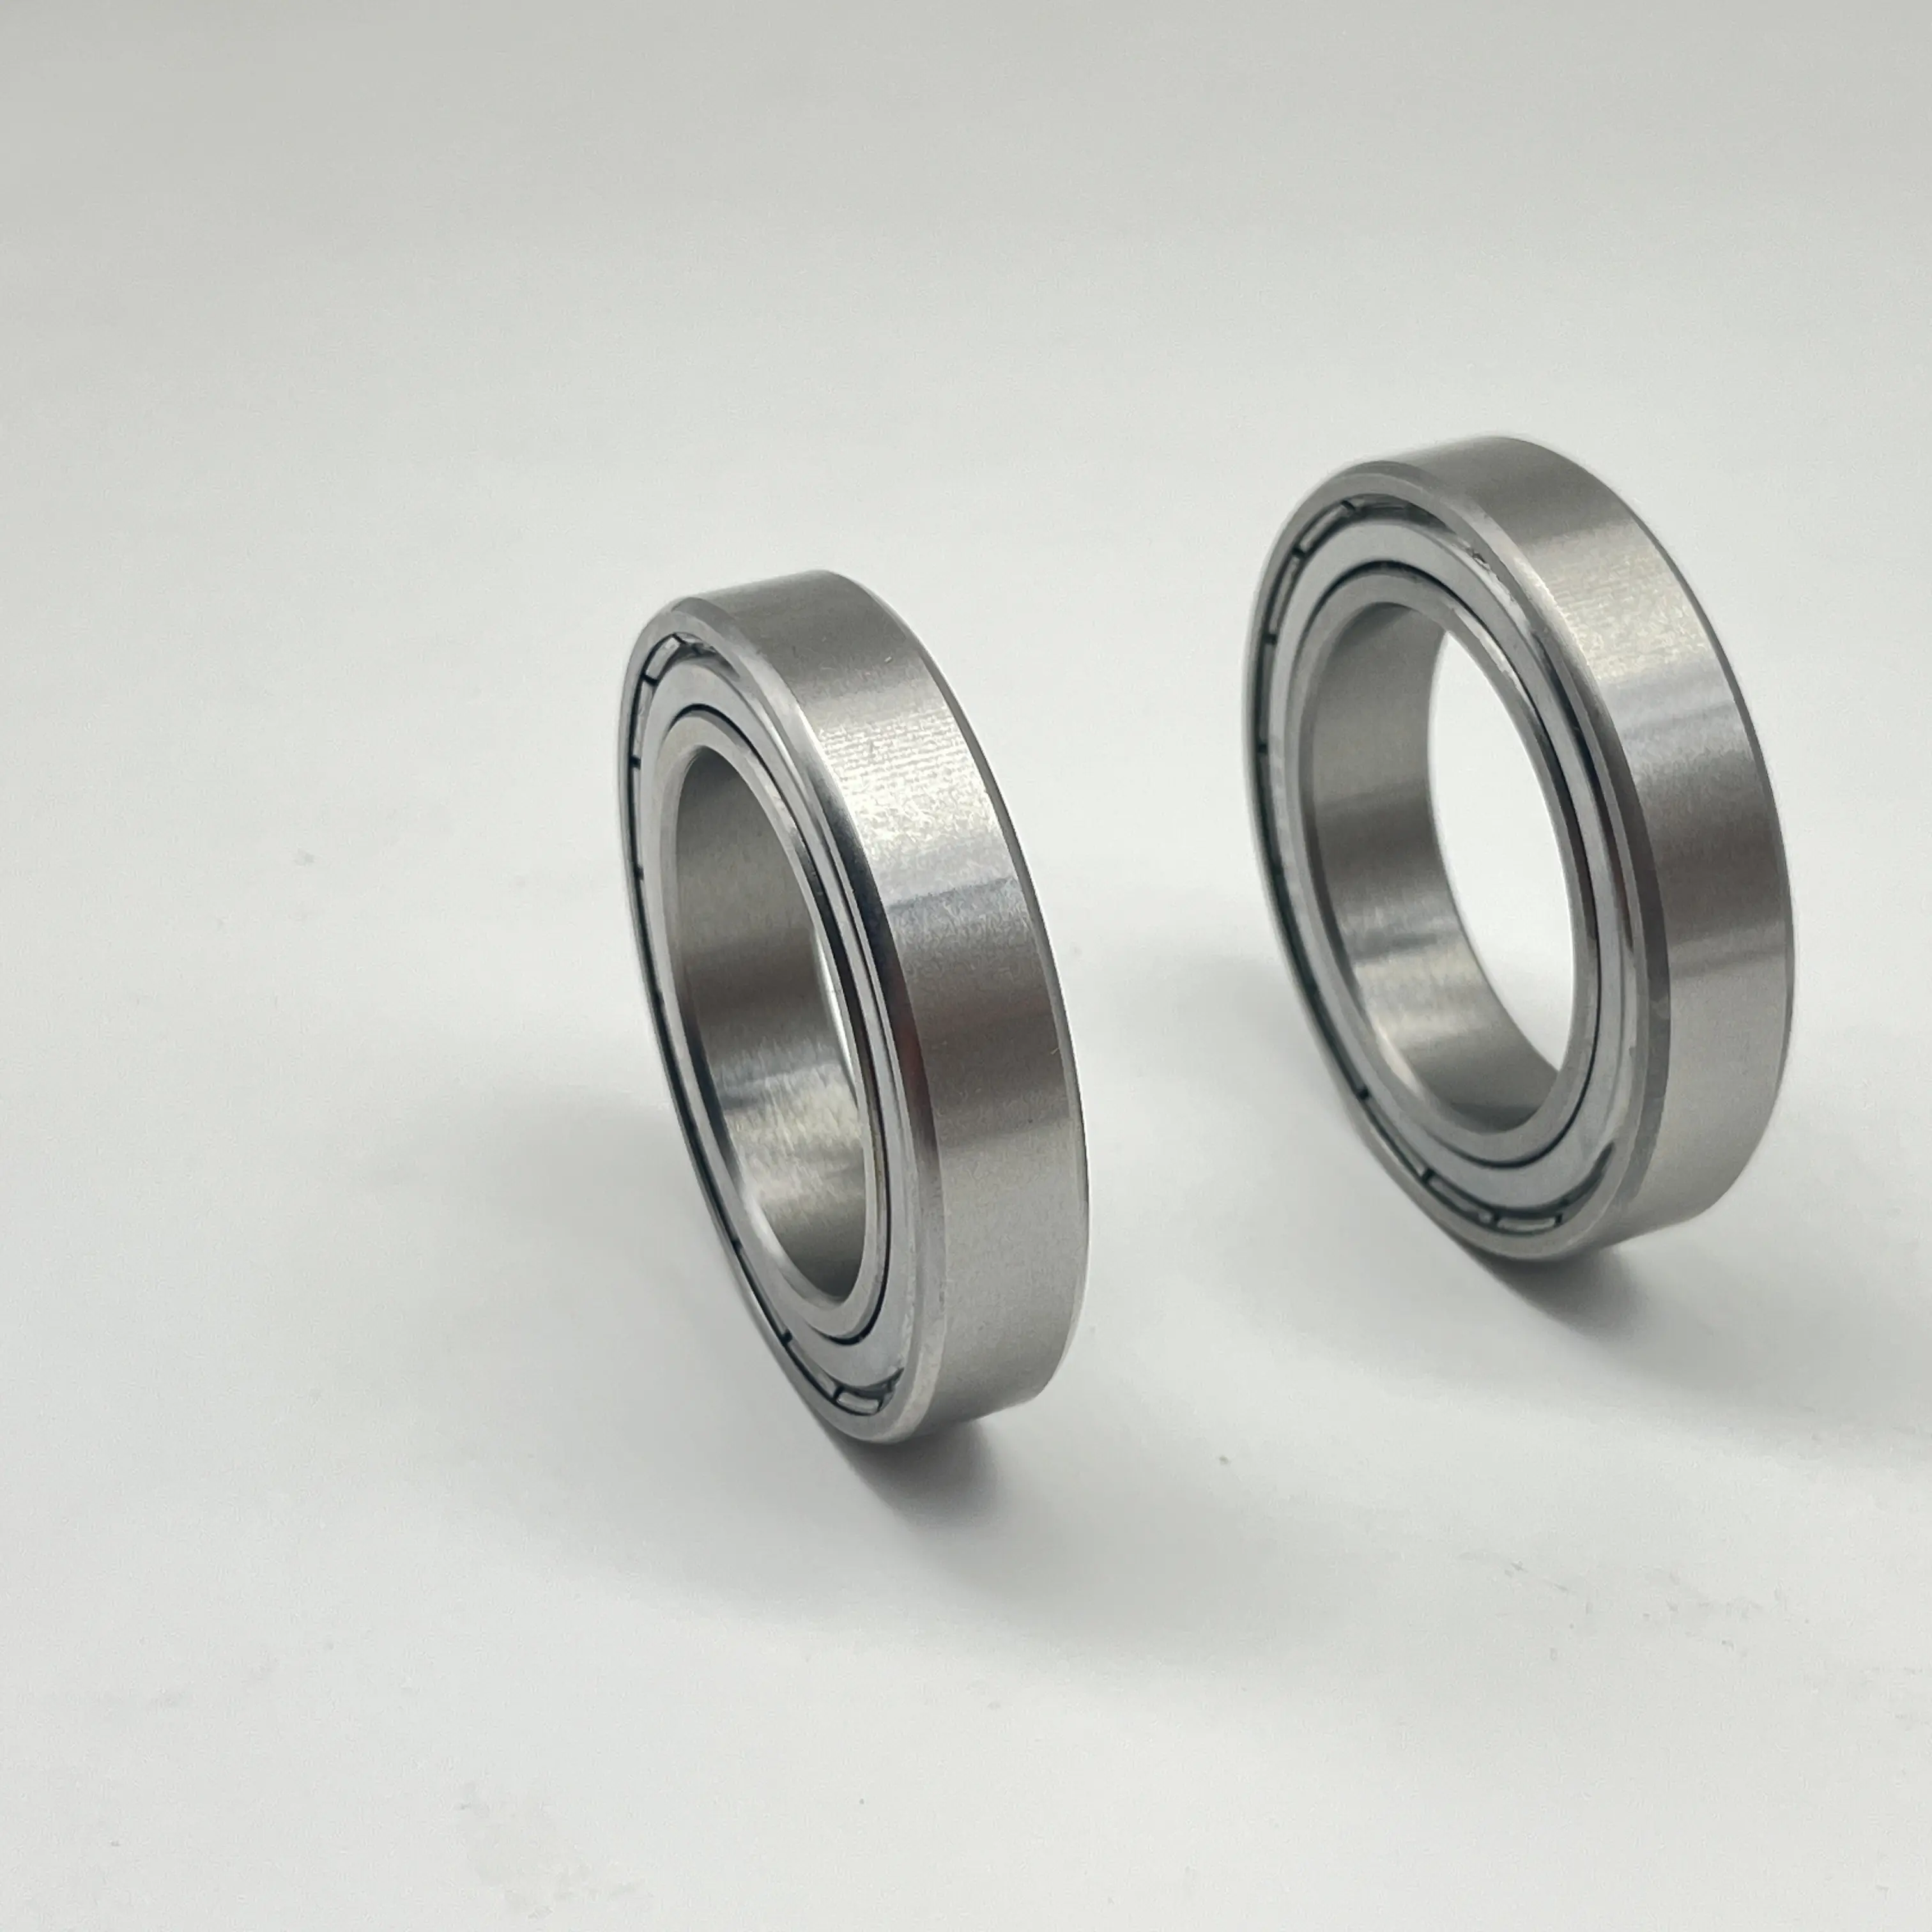 Production and manufacturing of stainless steel deep groove ball bearings SS6922